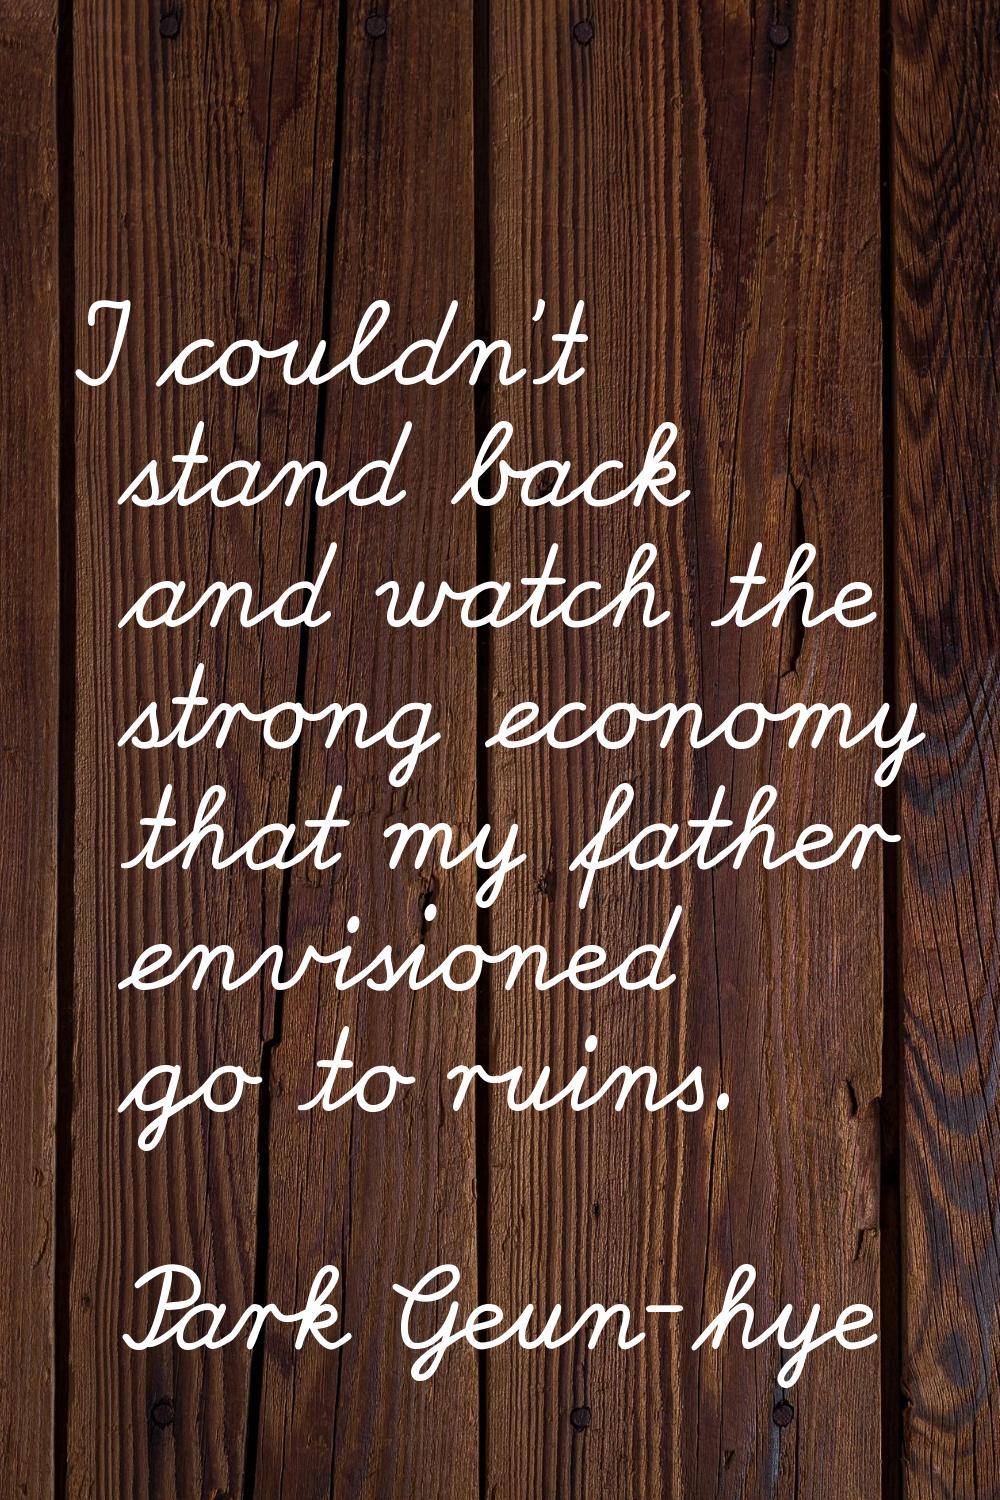 I couldn't stand back and watch the strong economy that my father envisioned go to ruins.